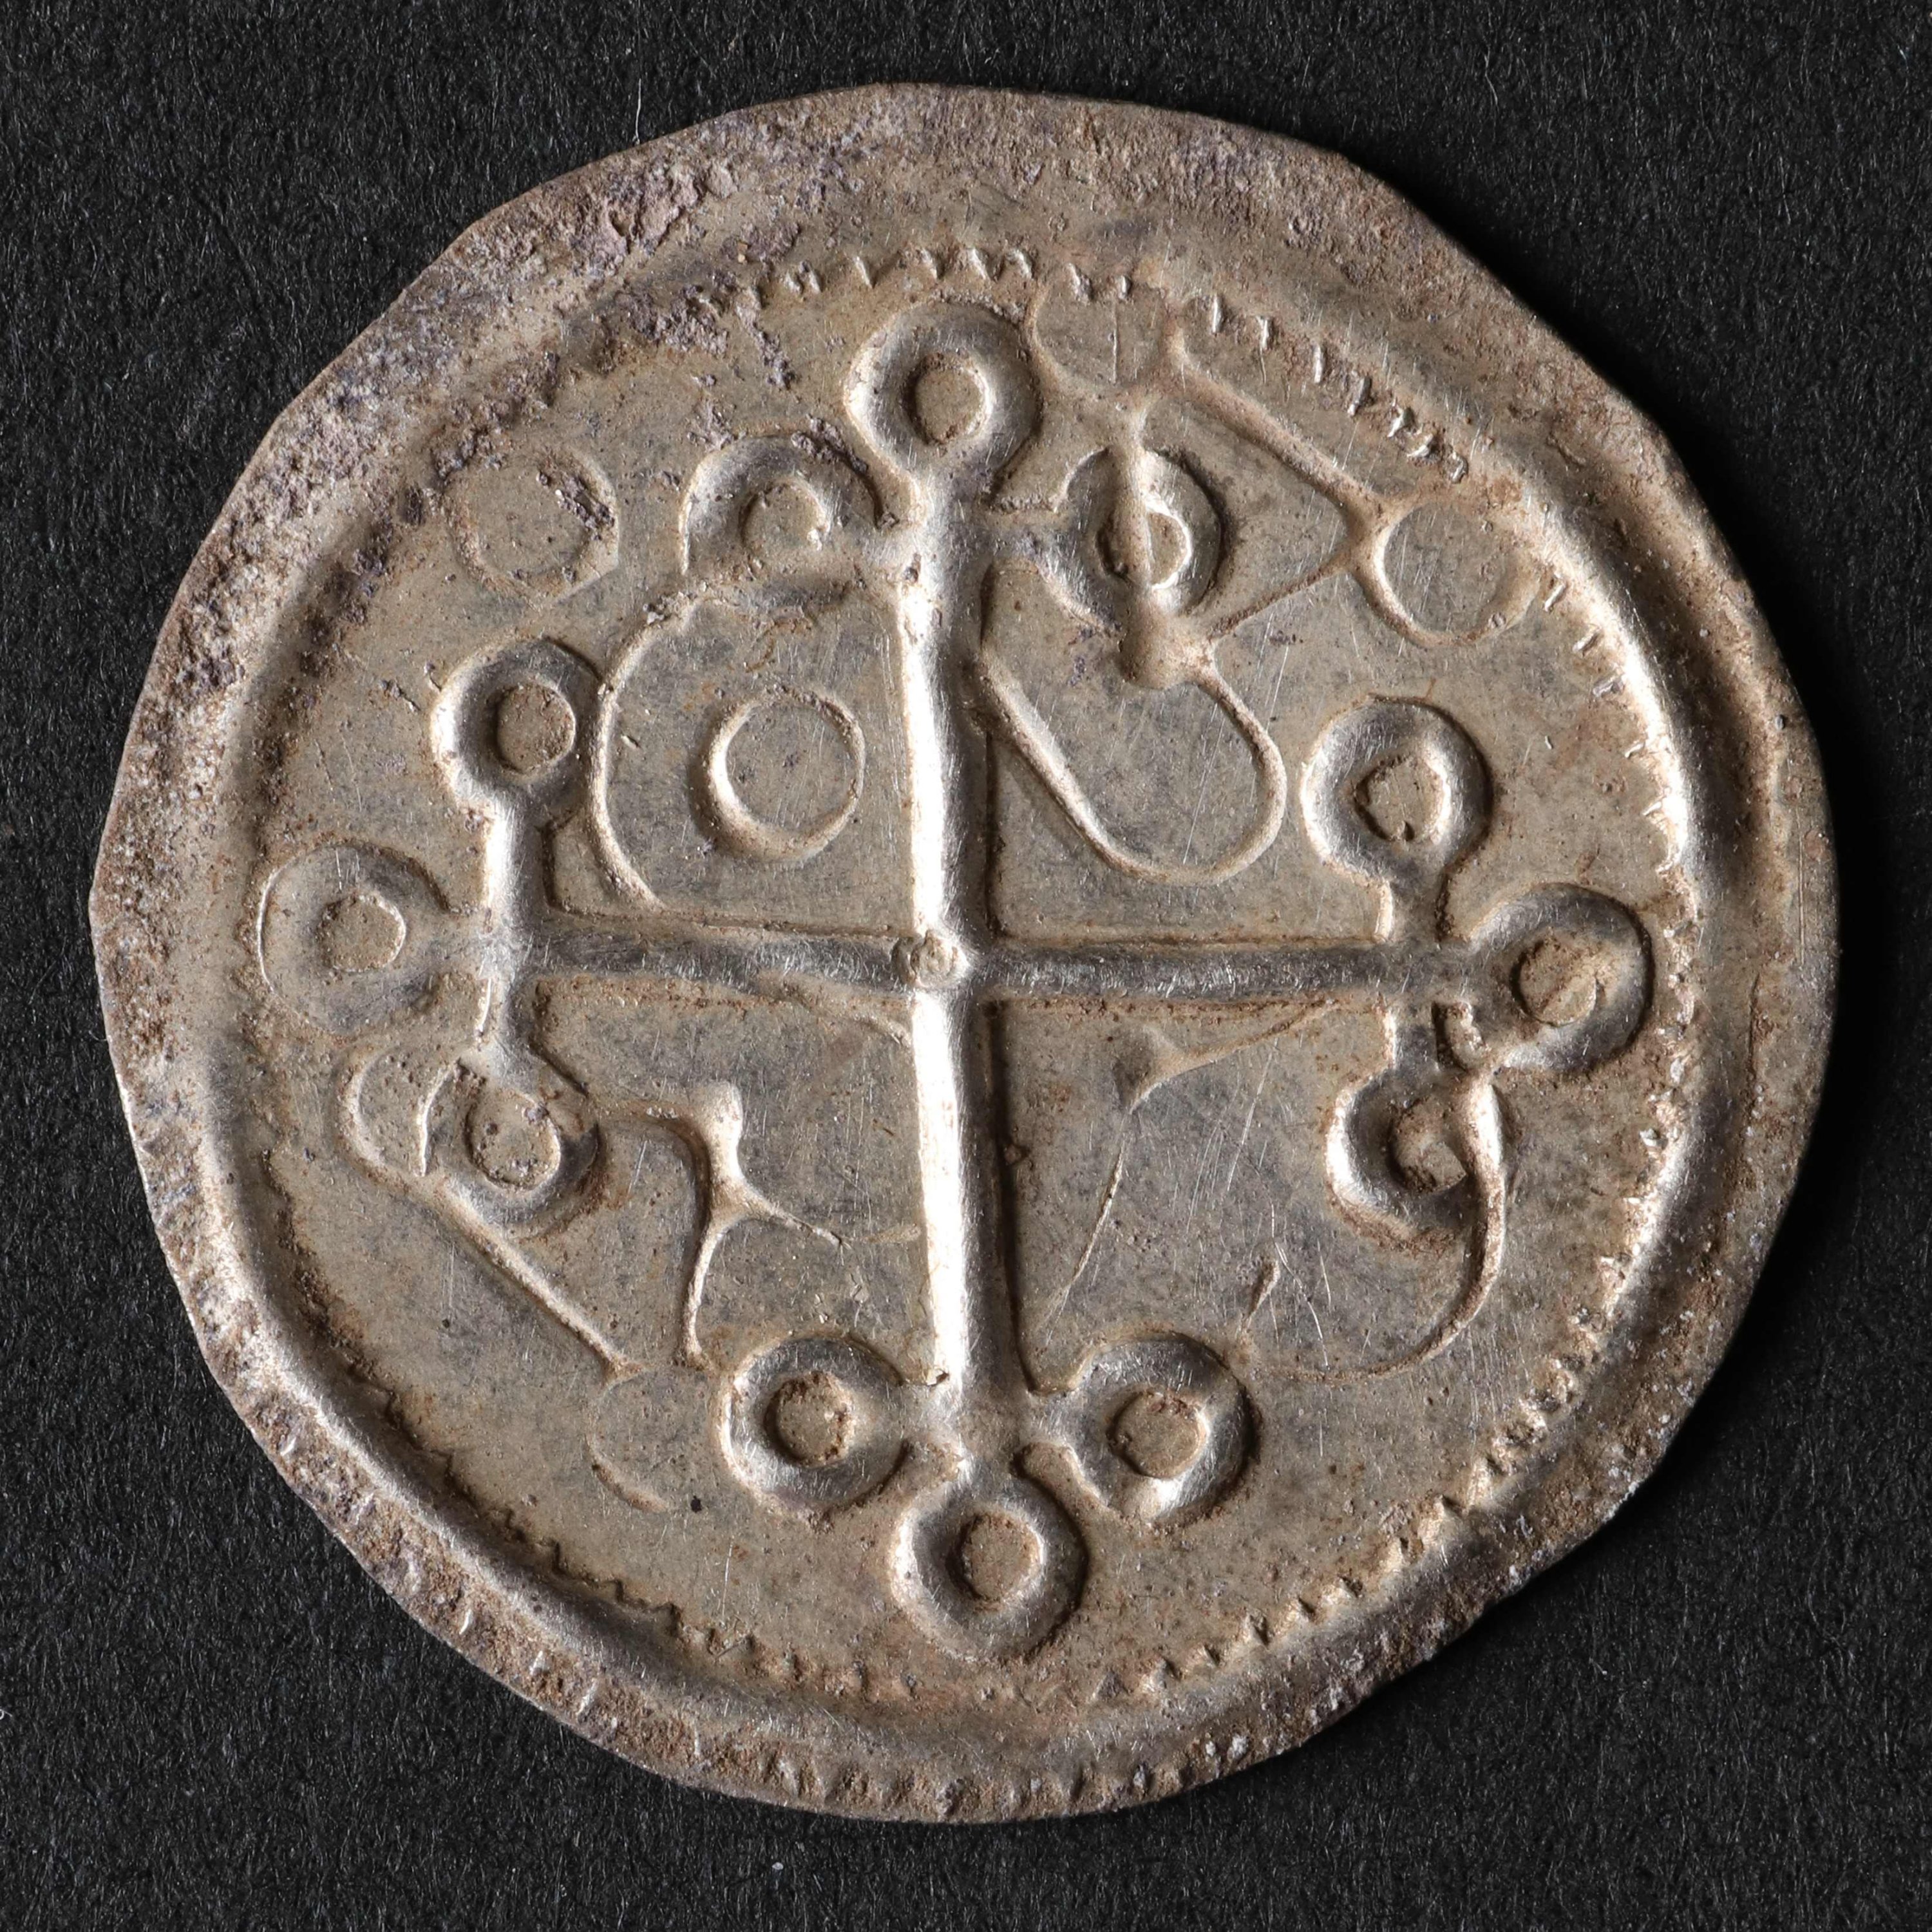 A coin in the Historical Museum of Northern Jutland, a part of a trove believed to be more than 1,000 years old and that was found in autumn 2022 near the Viking fortress site of Fyrkat, near the Danish city of Hobro, April 24, 2023. (AFP Photo)